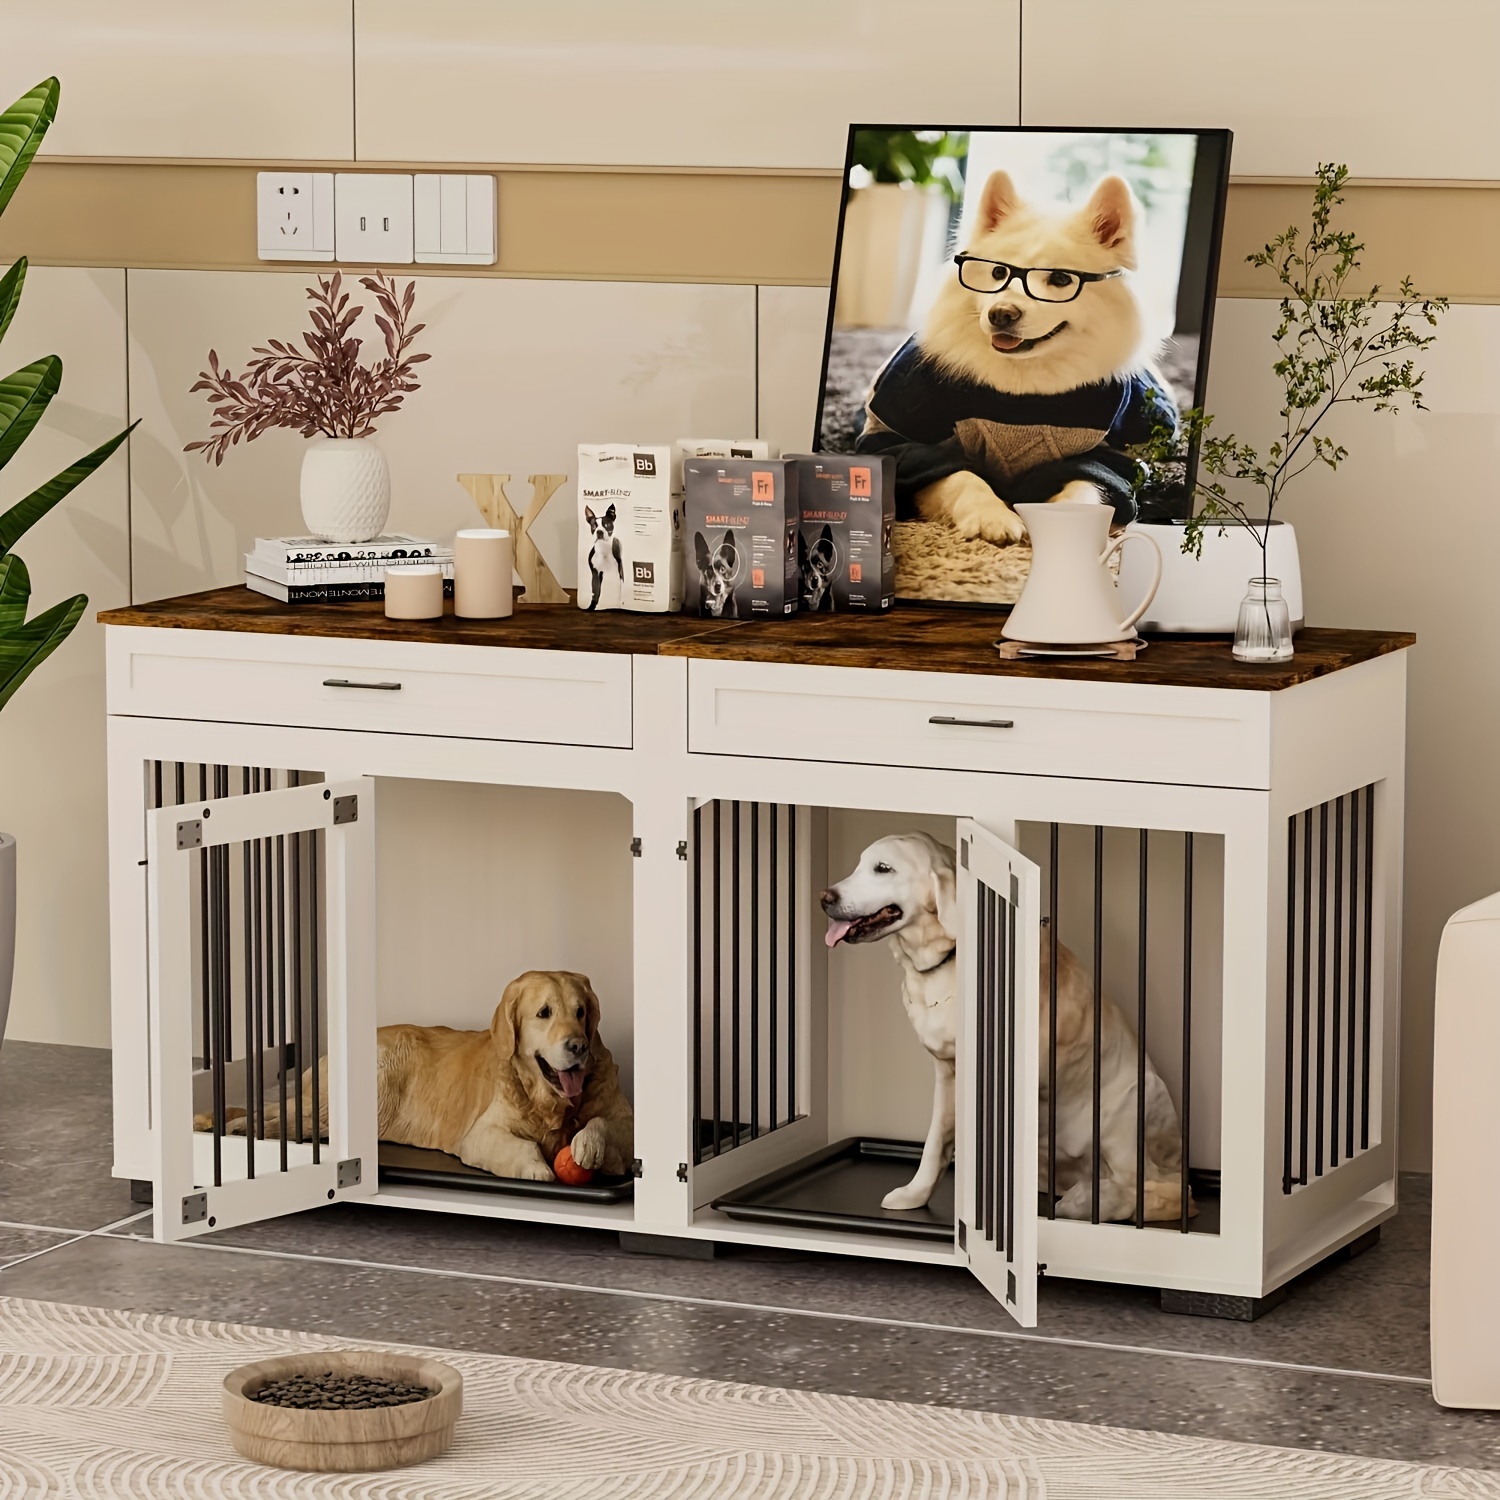 

Large Dog Crate Furniture, Wooden Dog Kennel With Removable Room Divider And 2 Trays, Heavy Duty Dog Crate For 1-2 Large Dogs, End Table W/ Two-room Design And 2 Front Doors